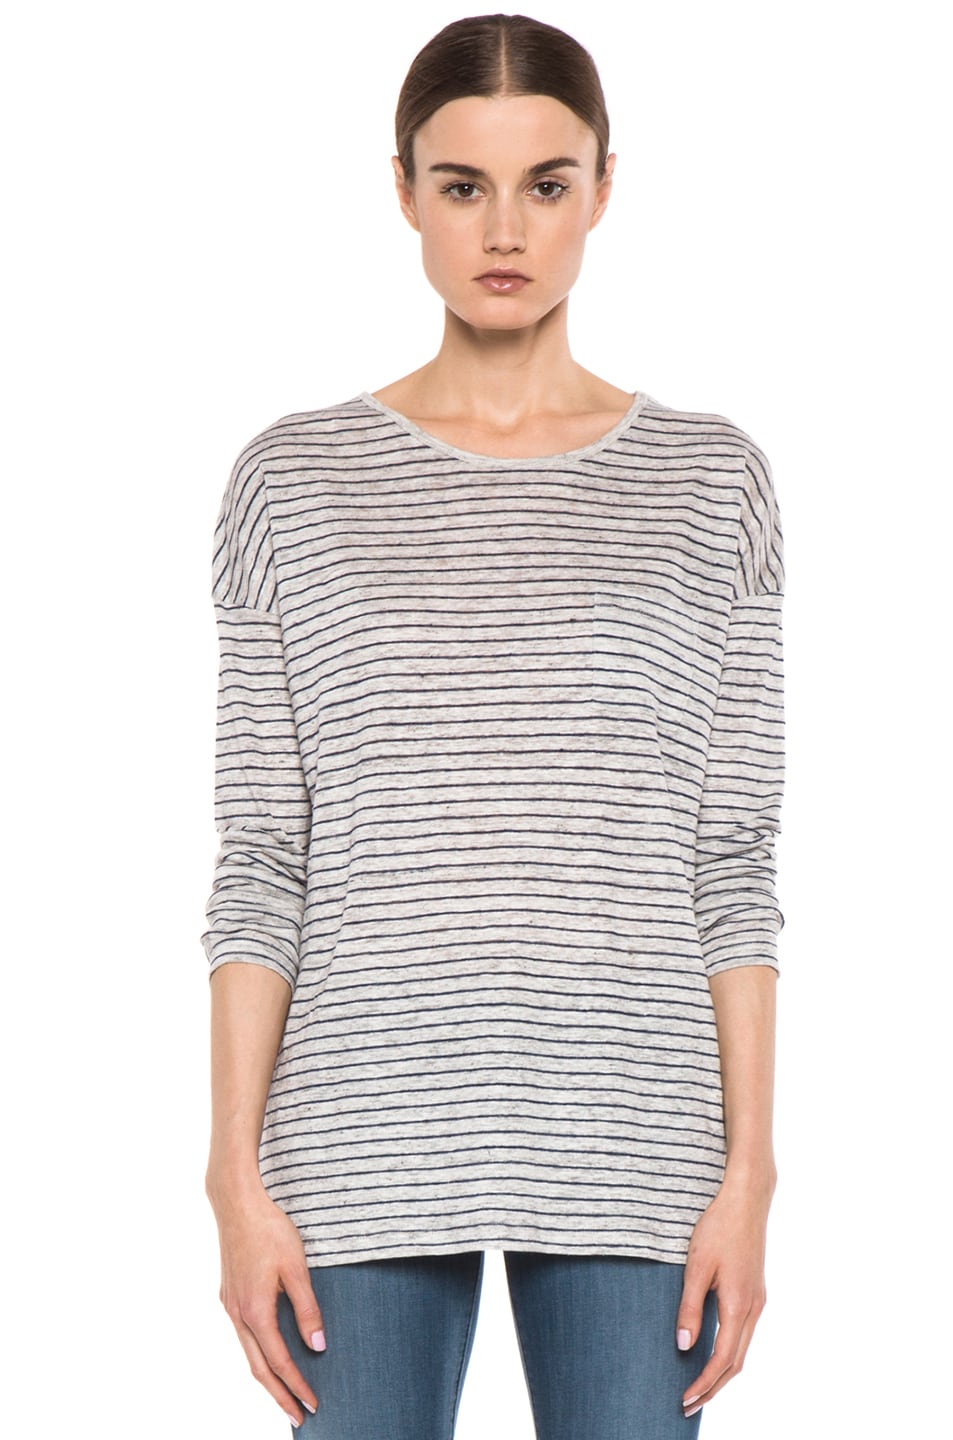 Image 1 of Vince Striped Long Sleeve Tee in Light Heather Grey & Heather Navy